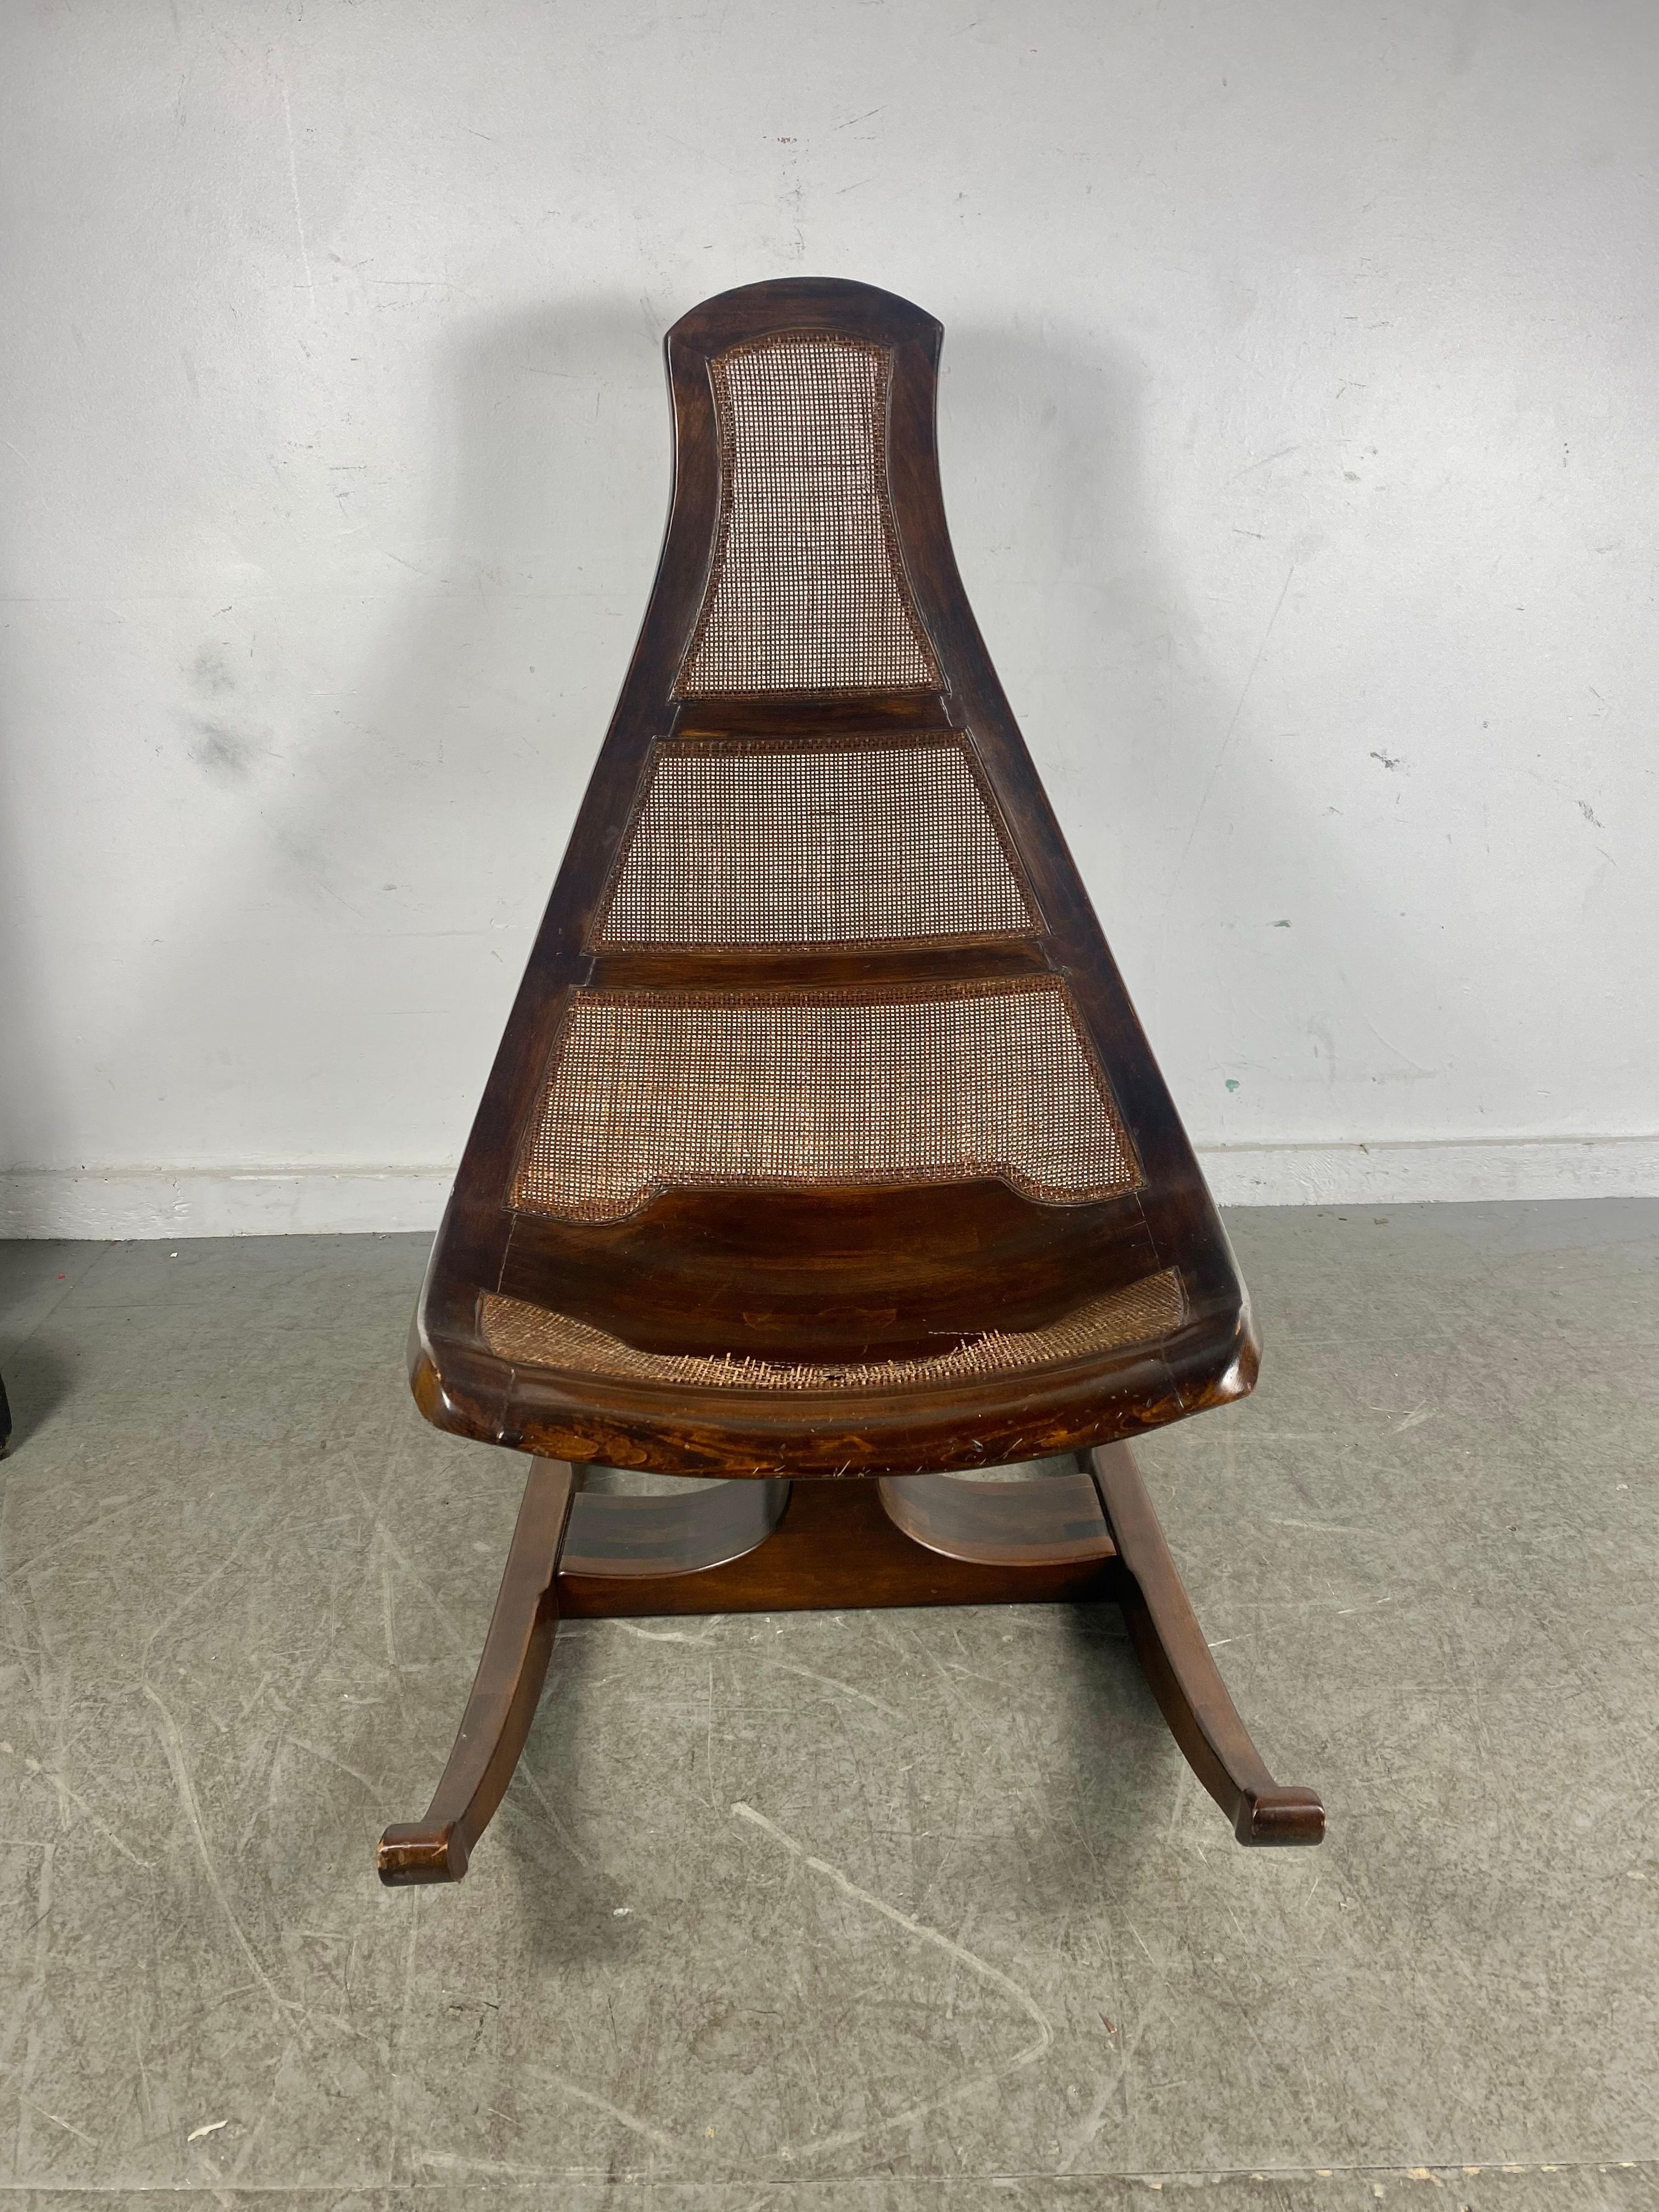 Sculptural Brazilian rocking chair in the style of Joaquim Tenriero. Amazing quality and design. Original cane seat in need of restoration. (see photo). Hand delivery avail to New York City or anywhere en route from Buffalo NY.